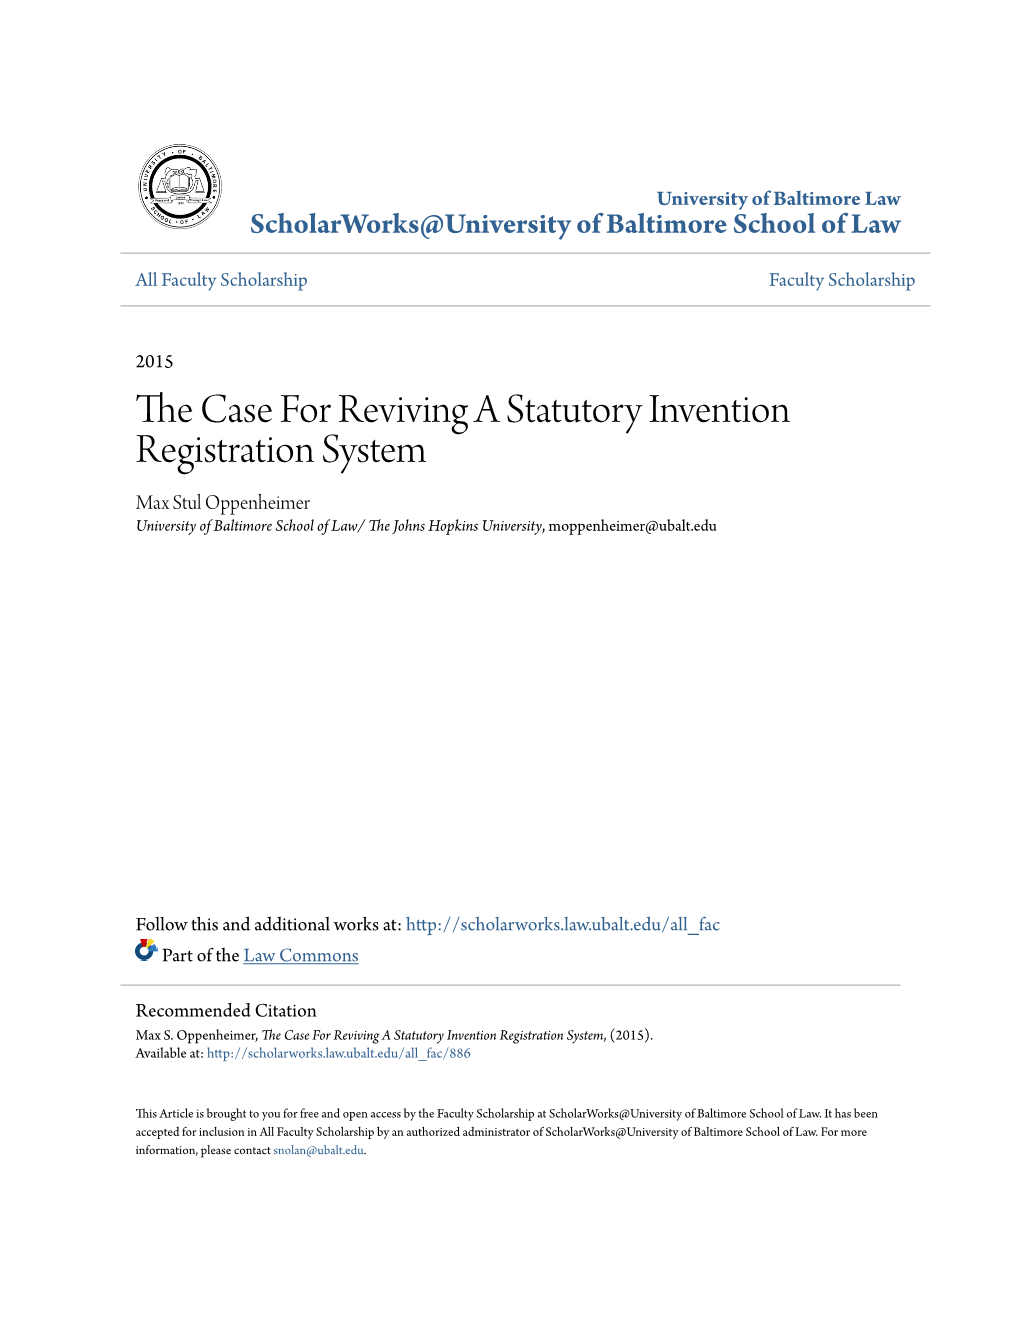 The Case for Reviving a Statutory Invention Registration System, (2015)